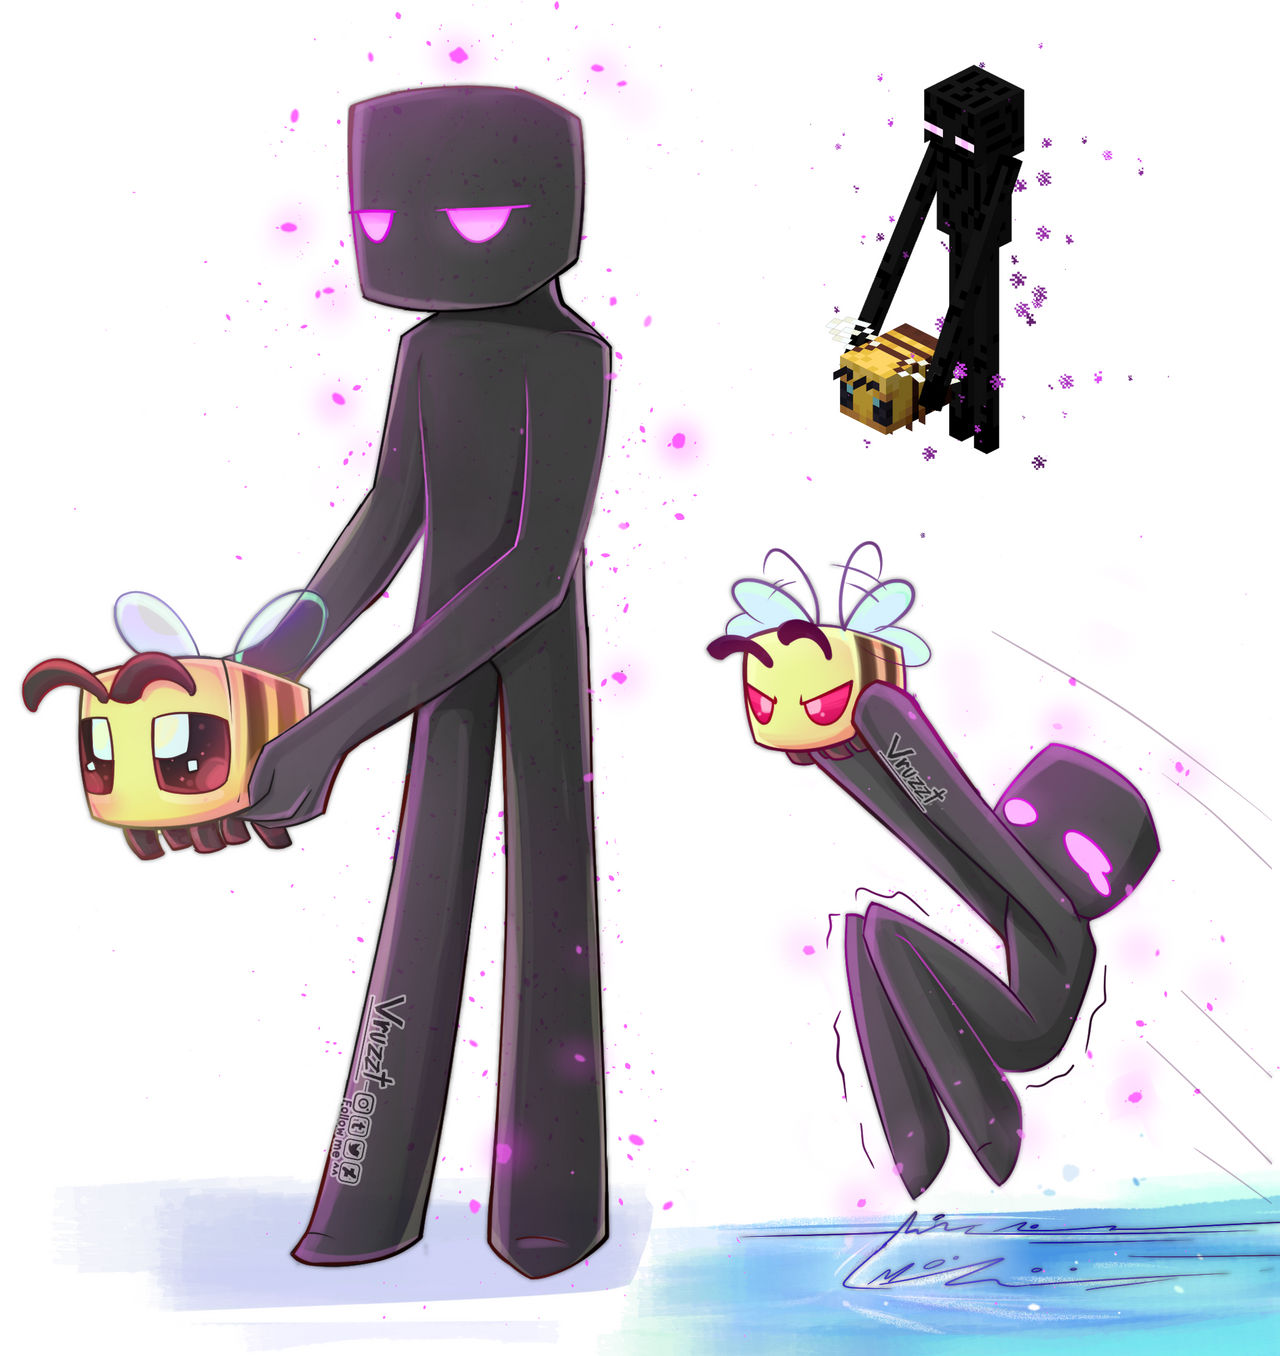 Enderman and Bee by Vruzzt on DeviantArt